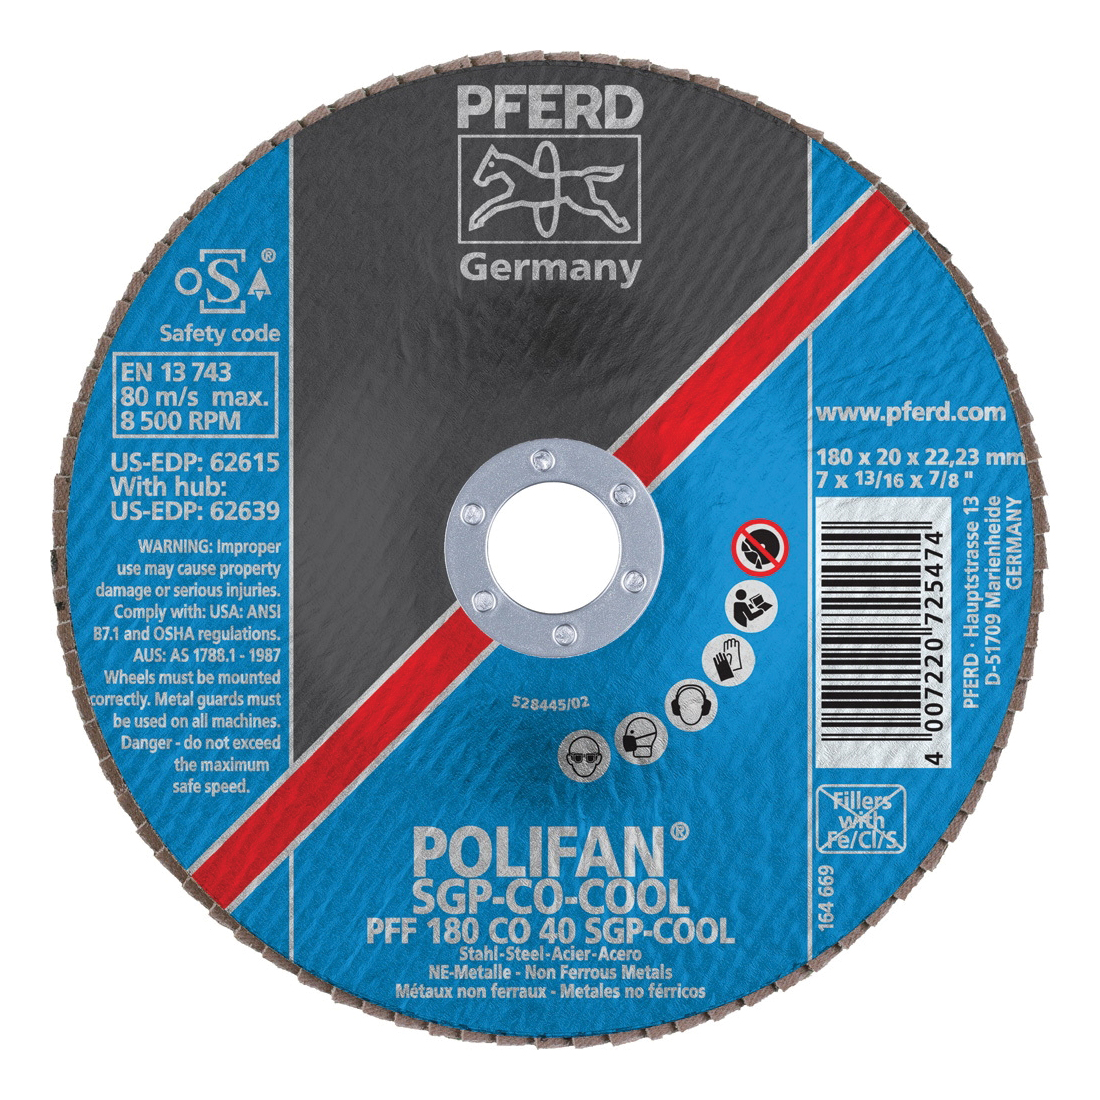 PFERD Polifan® 62615 Special Line SGP CO-COOL Unthreaded Coated Abrasive Flap Disc, 7 in Dia, 7/8 in Center Hole, 40 Grit, Ceramic Oxide Abrasive, Type 27 Flat Disc